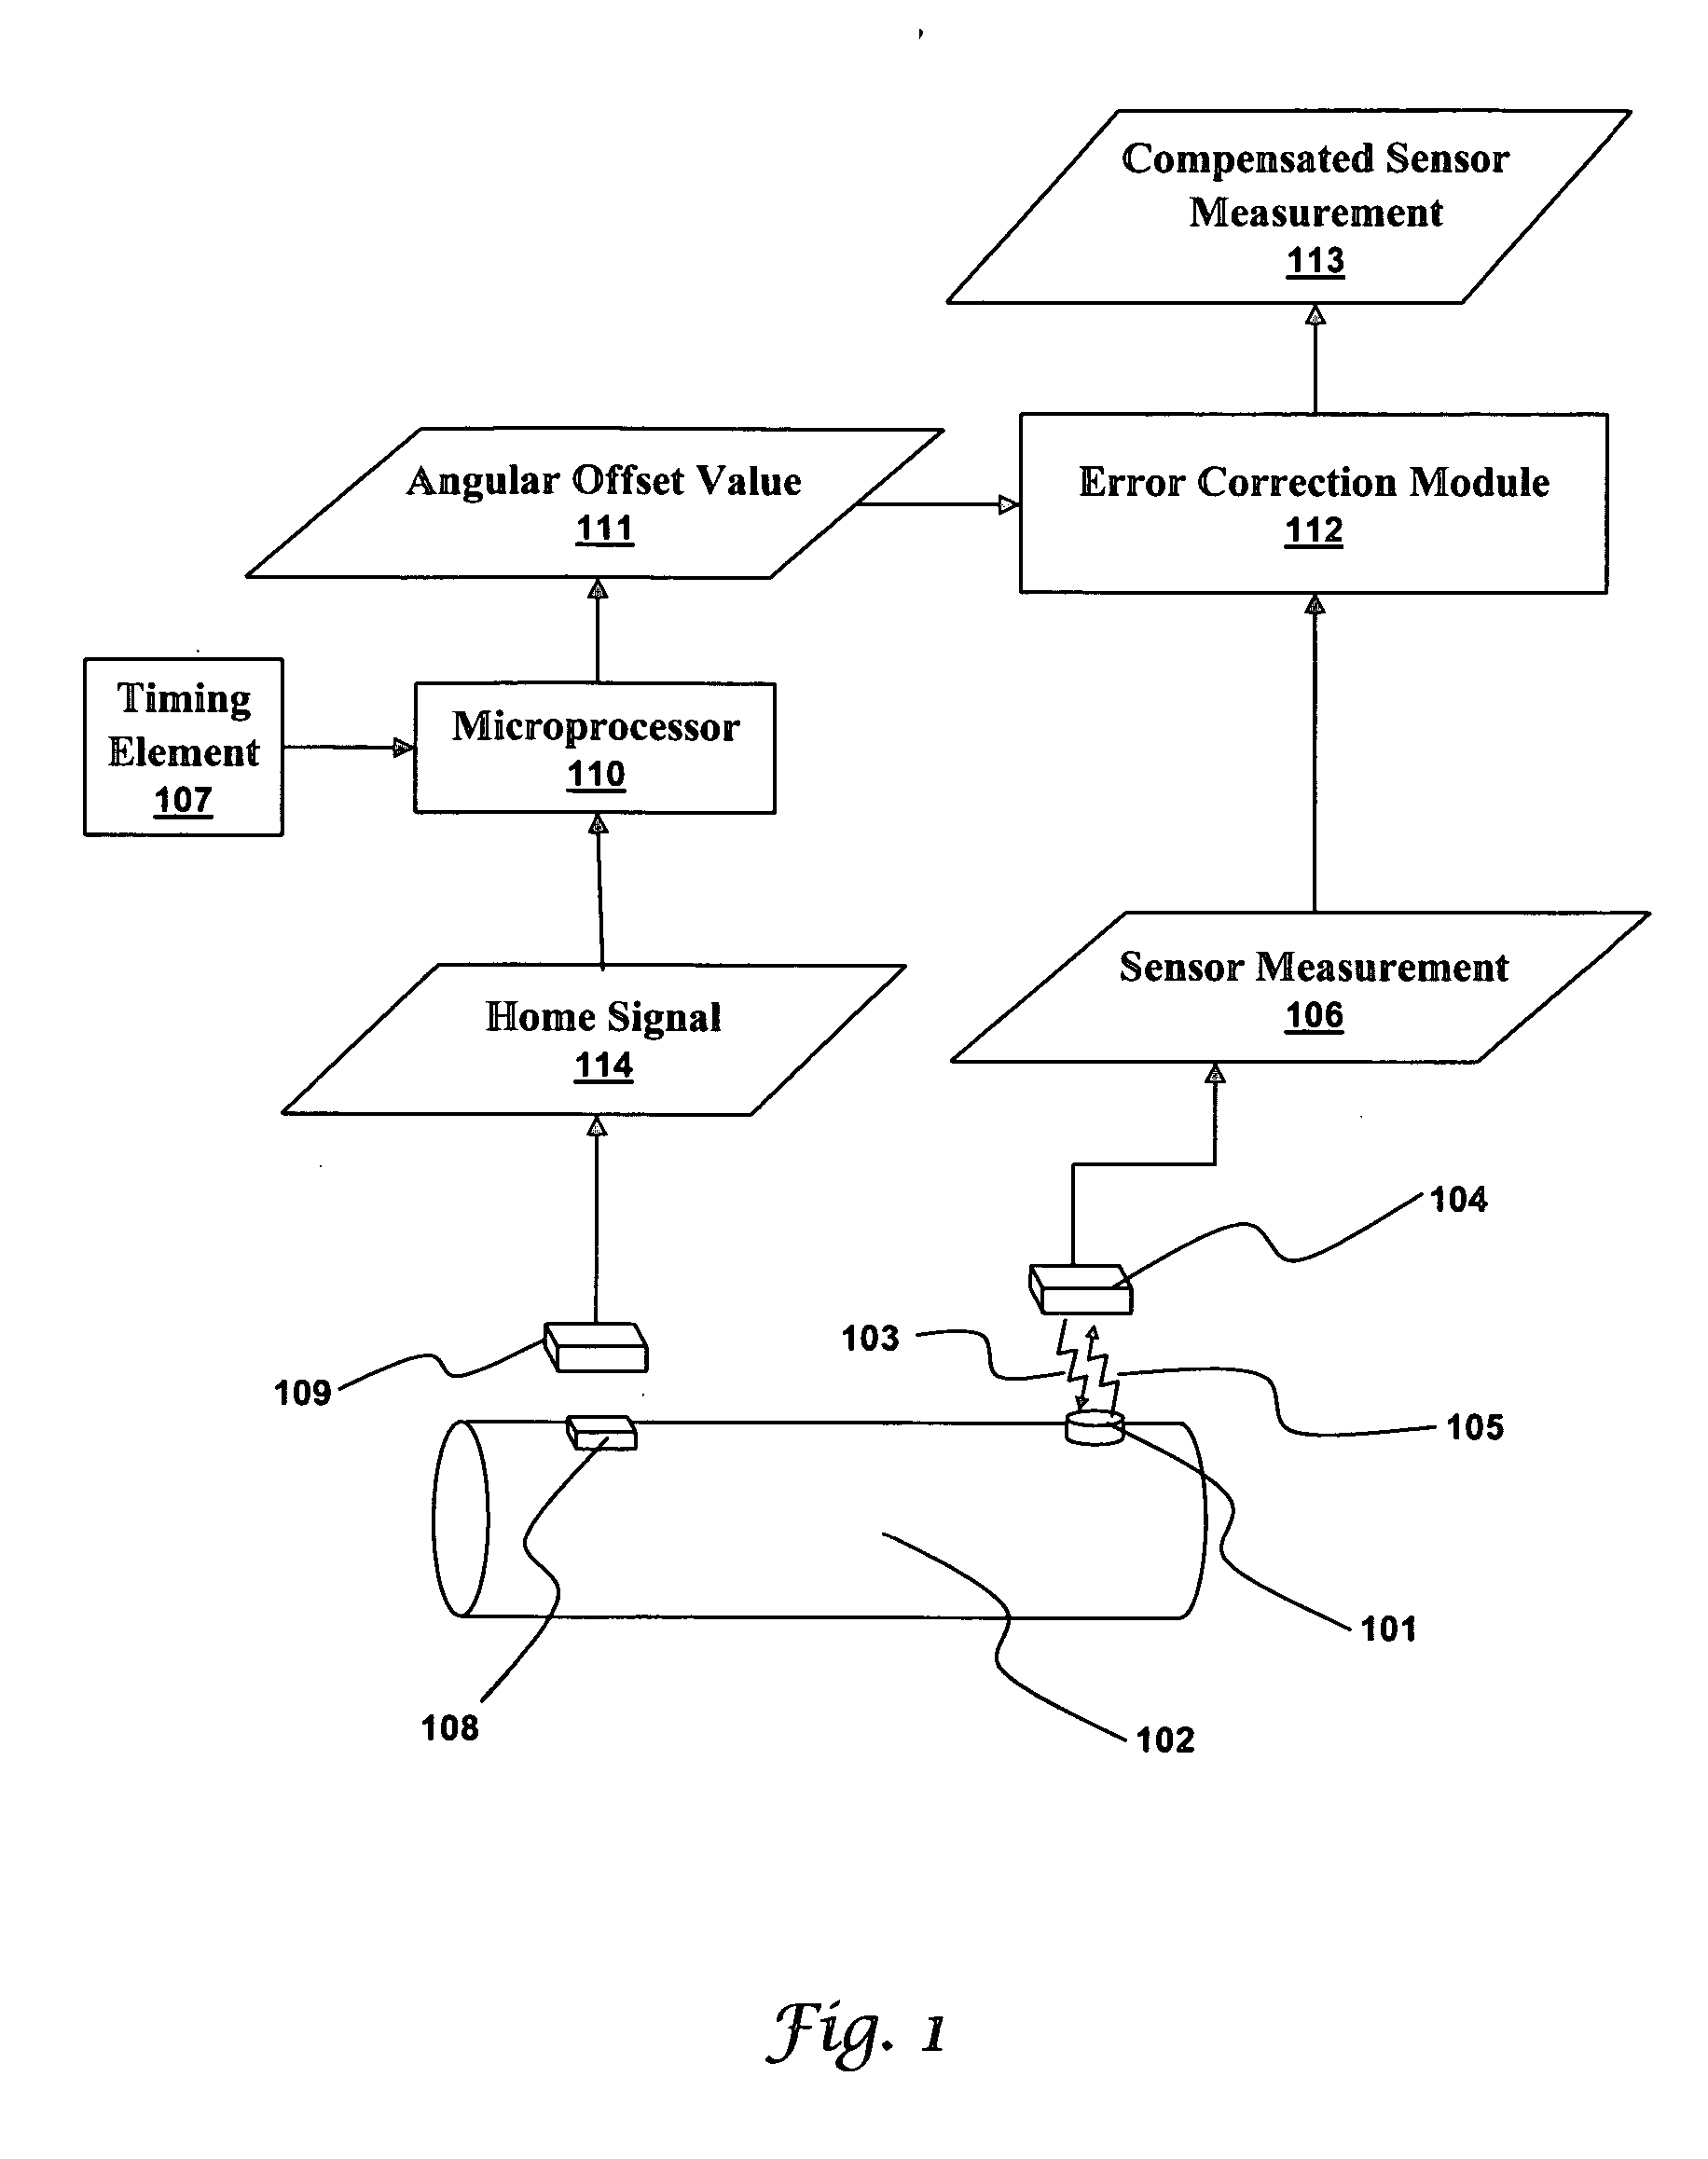 Error compensation for a wireless sensor using a rotating microstrip coupler to stimulate and interrogate a saw device